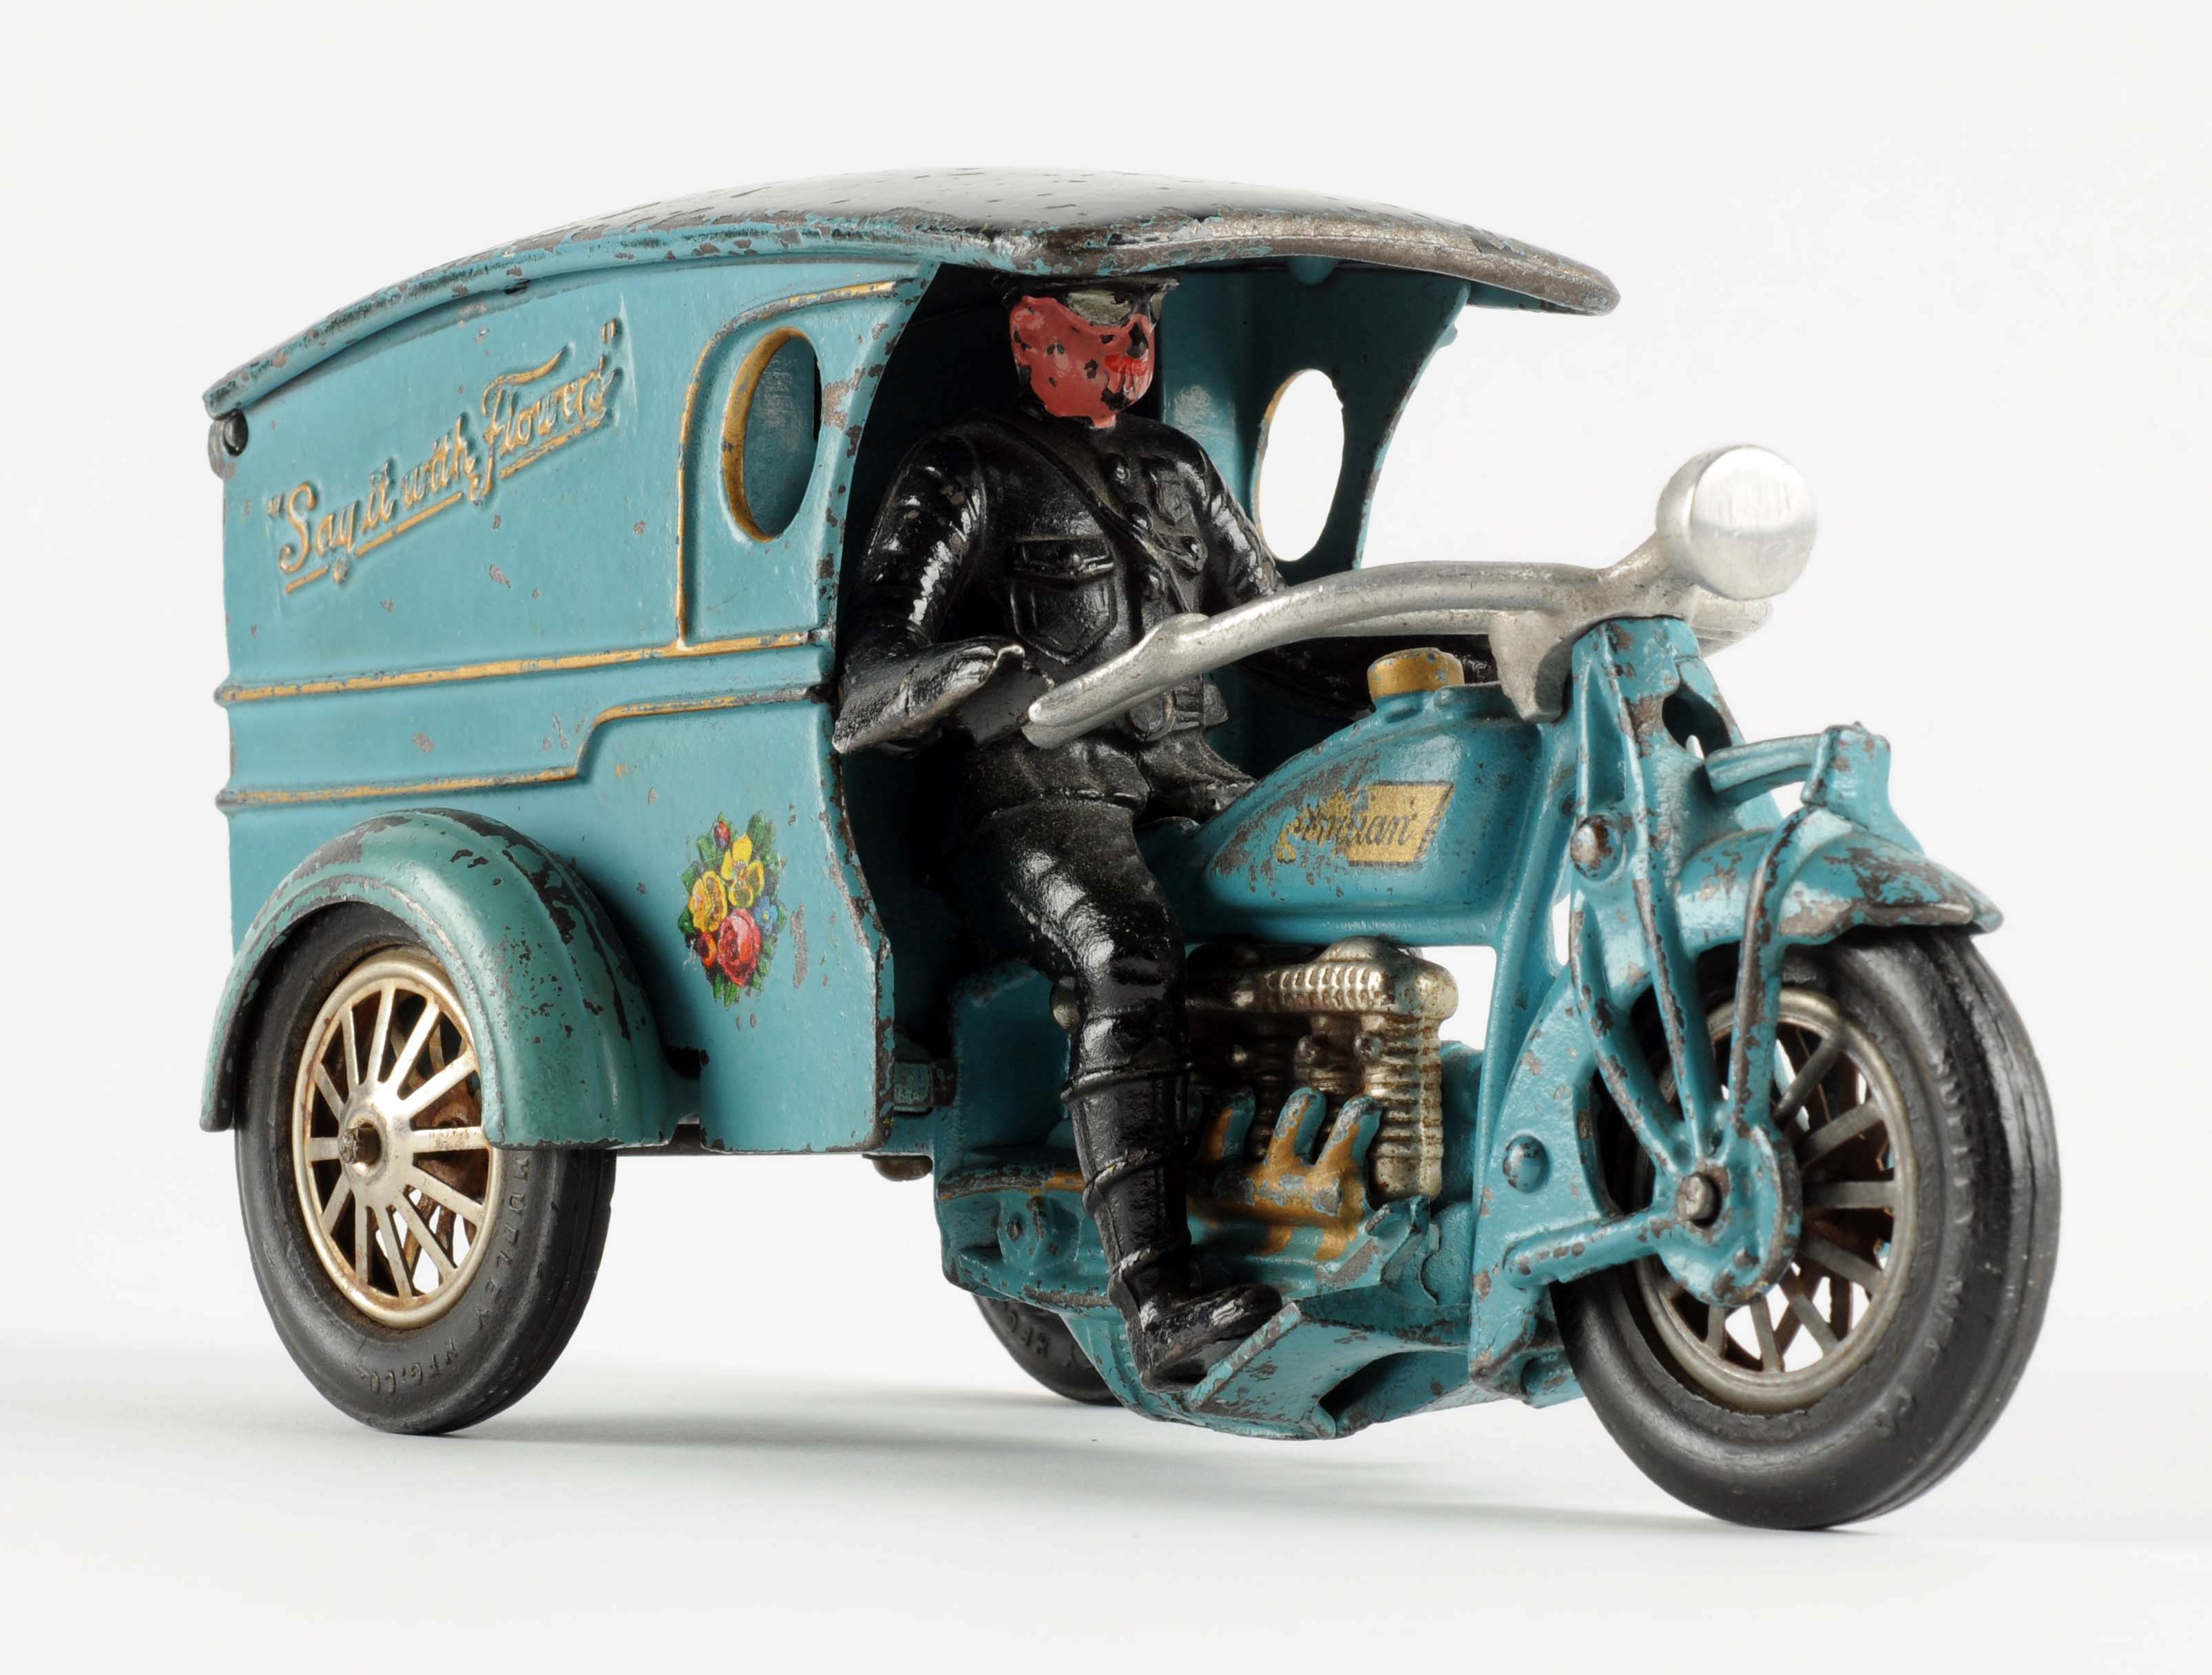 Hubley "Say It With Flowers" Delivery Motorcycle, estimated at $25,000-35,000.